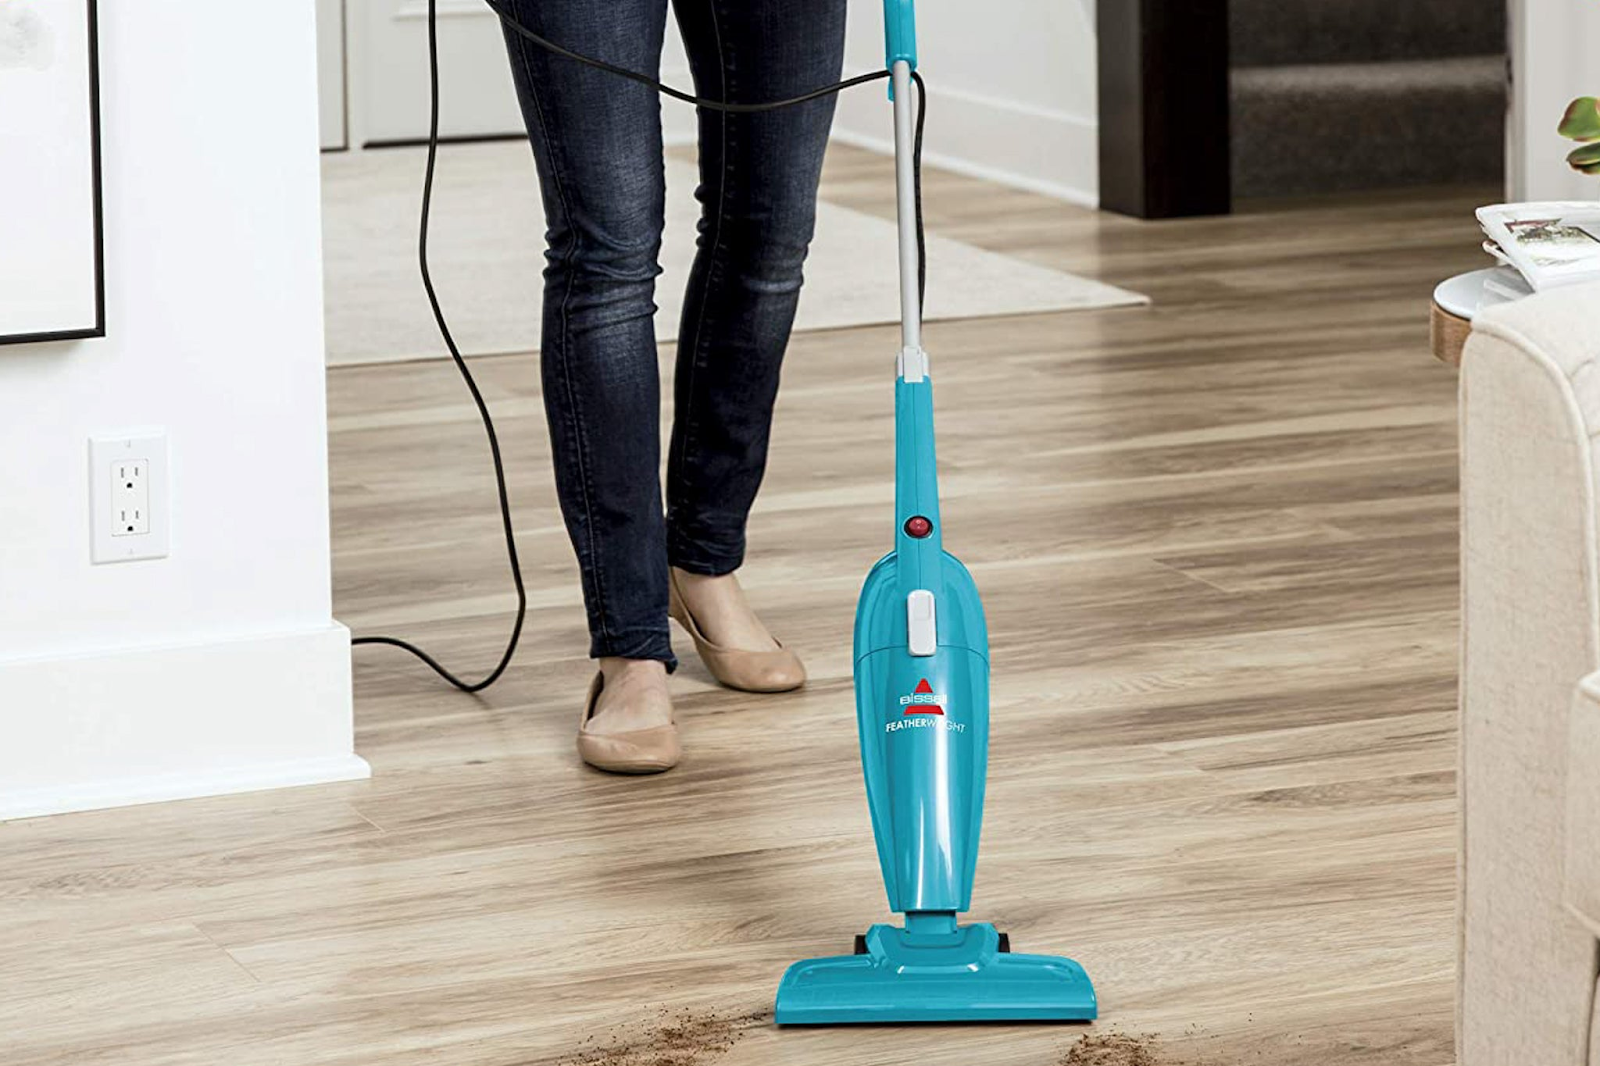 Vacuuming regularly help to keep your home neat and organized